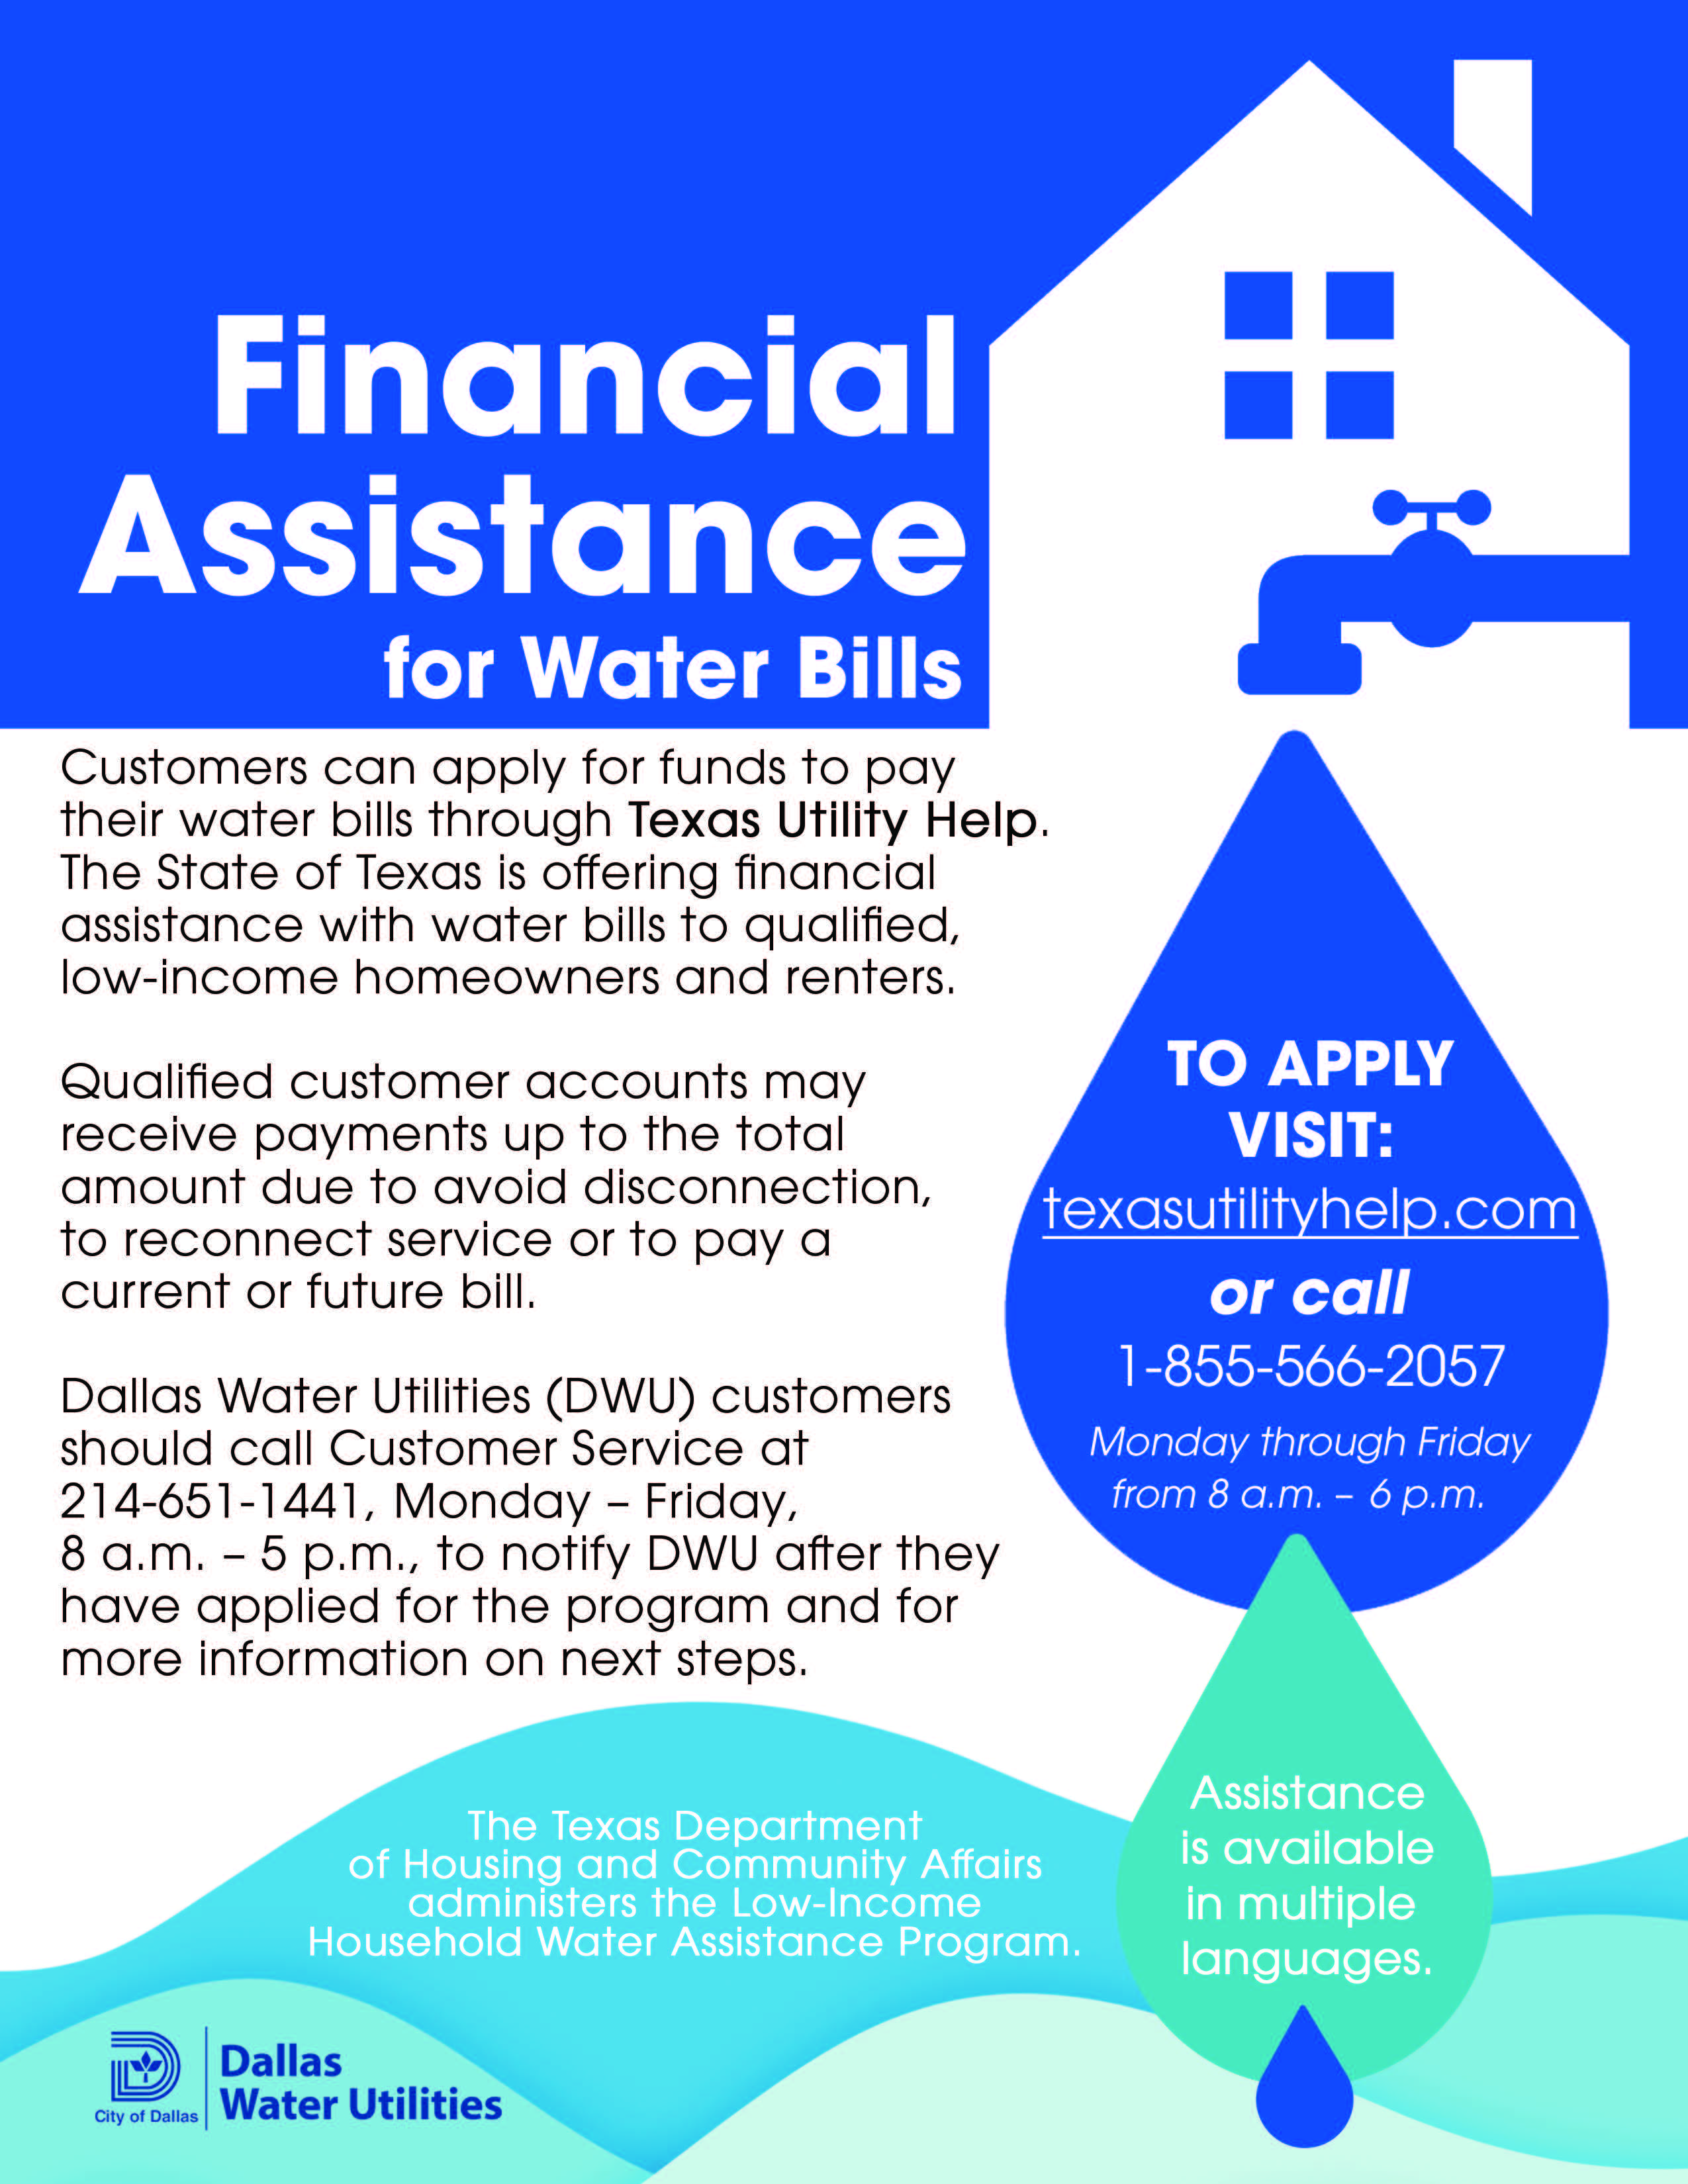 Financial Assistance for Water Bills in English.jpg